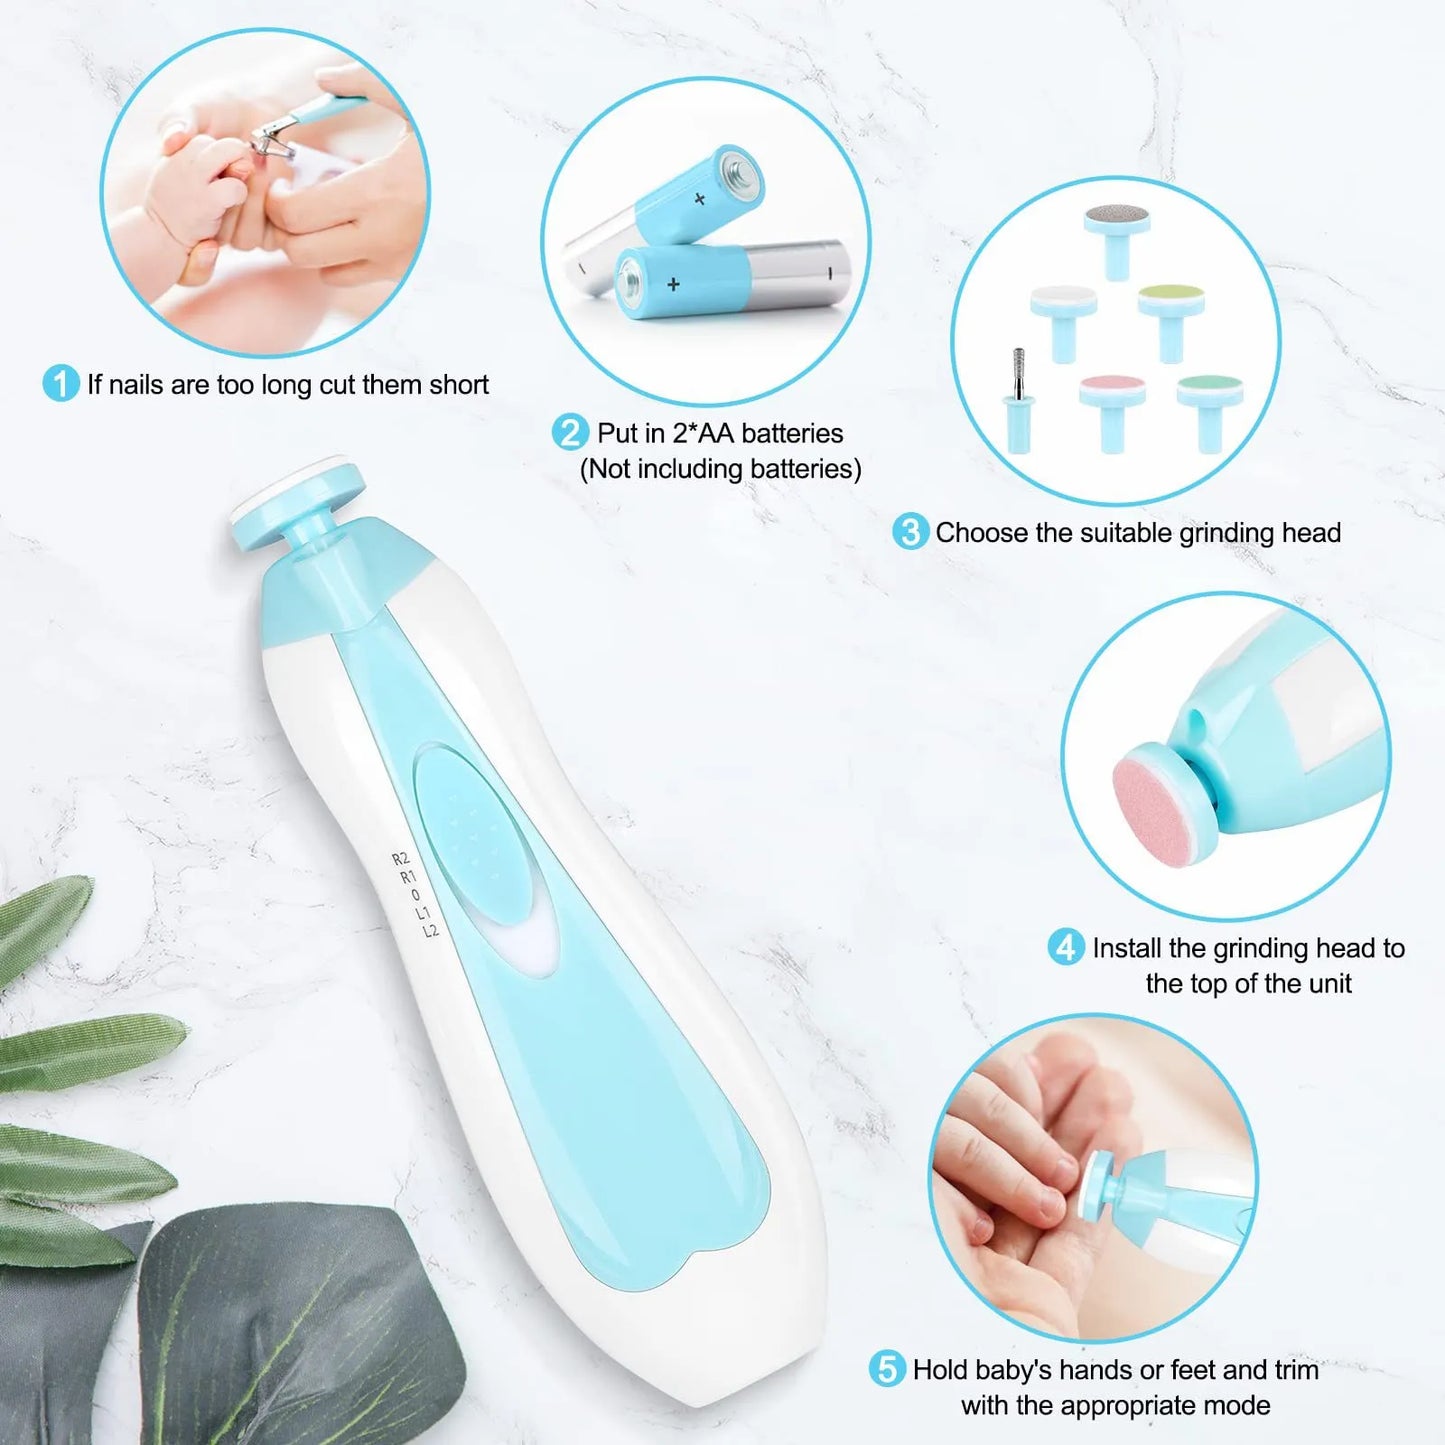 Multifunctional Electric Baby Nail Trimmer Set - Baby Nail File Clippers, Toes, Fingernail Cutter, Manicure Tool, Baby Care